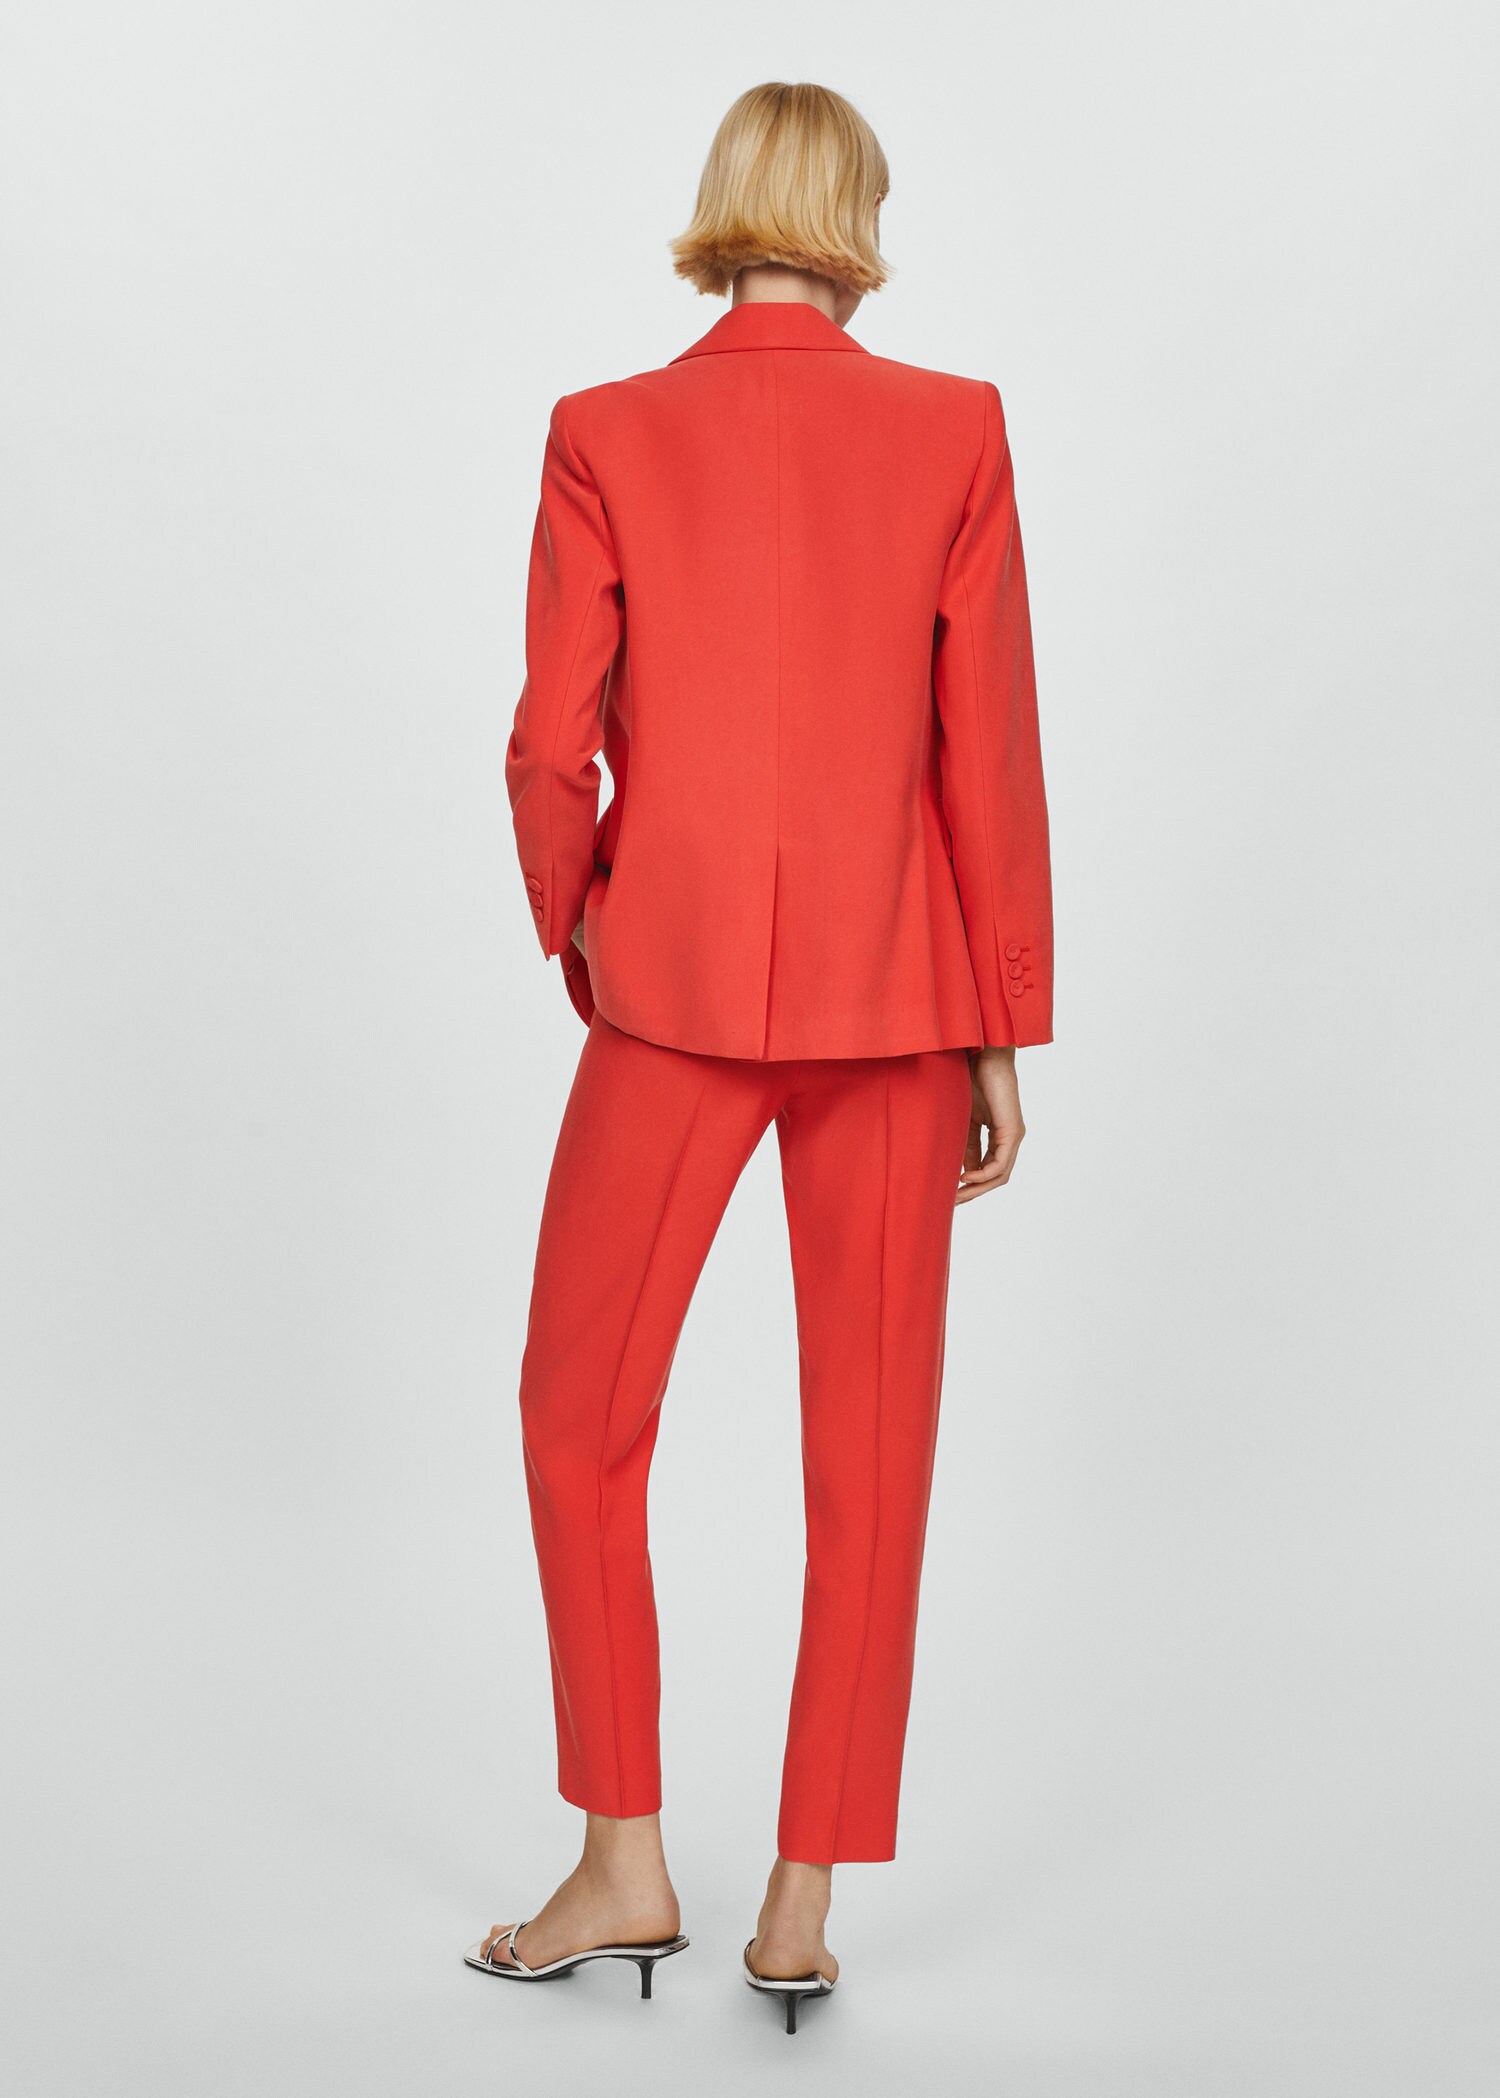 Women's Suits | Tailored & Trouser Suits | PrettyLittleThing